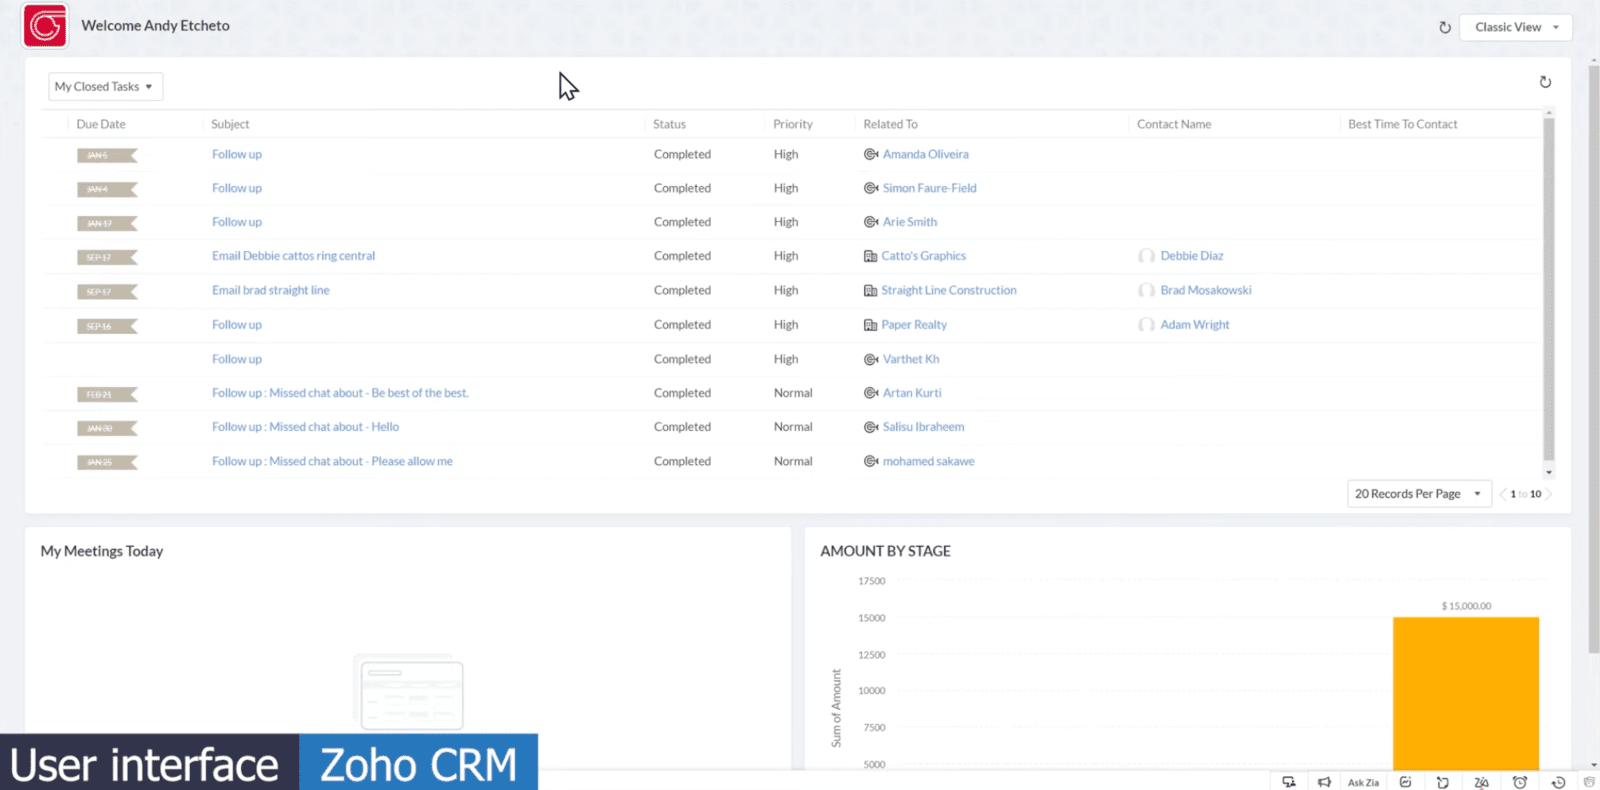 Zoho CRM user interface